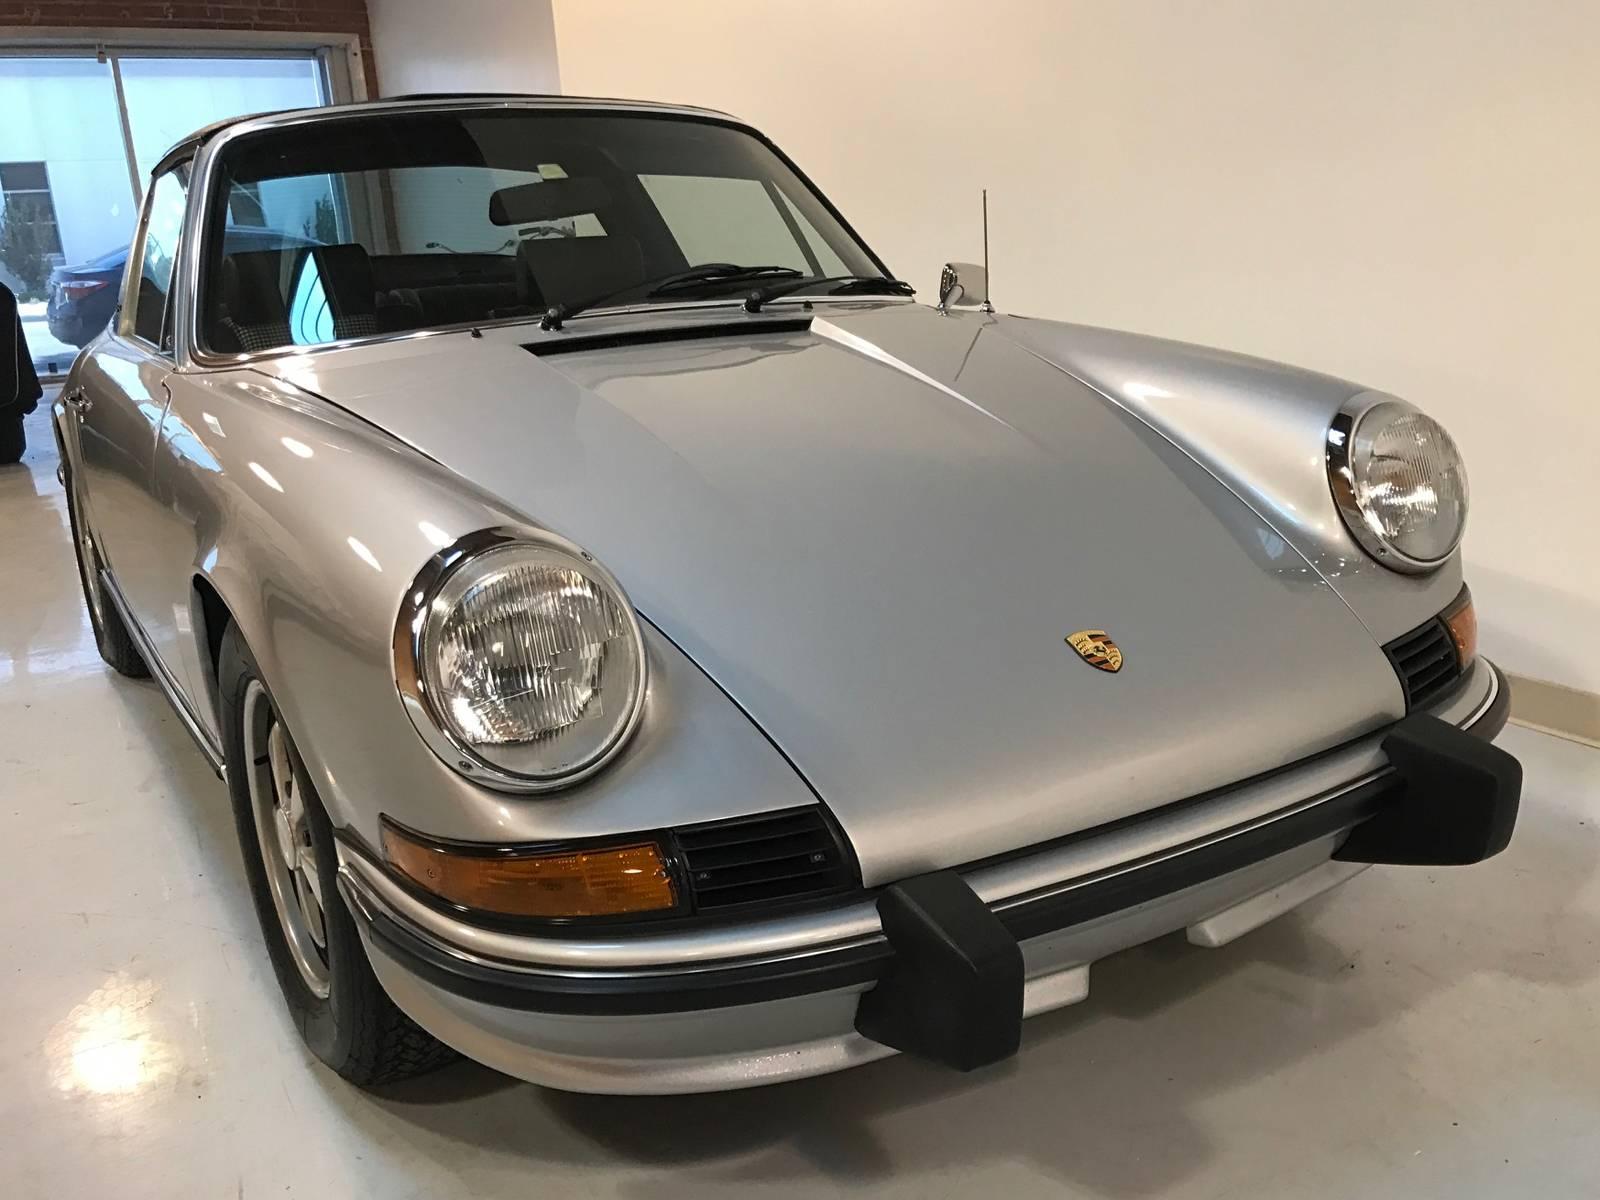 Having come from a family of Porsche dealers since the 1950’s, you will see us occasionally offer something European and no better way to start out than this spectacular 1973 Porsche 911 S Targa, one of only 923 ever produced in 73. The model year